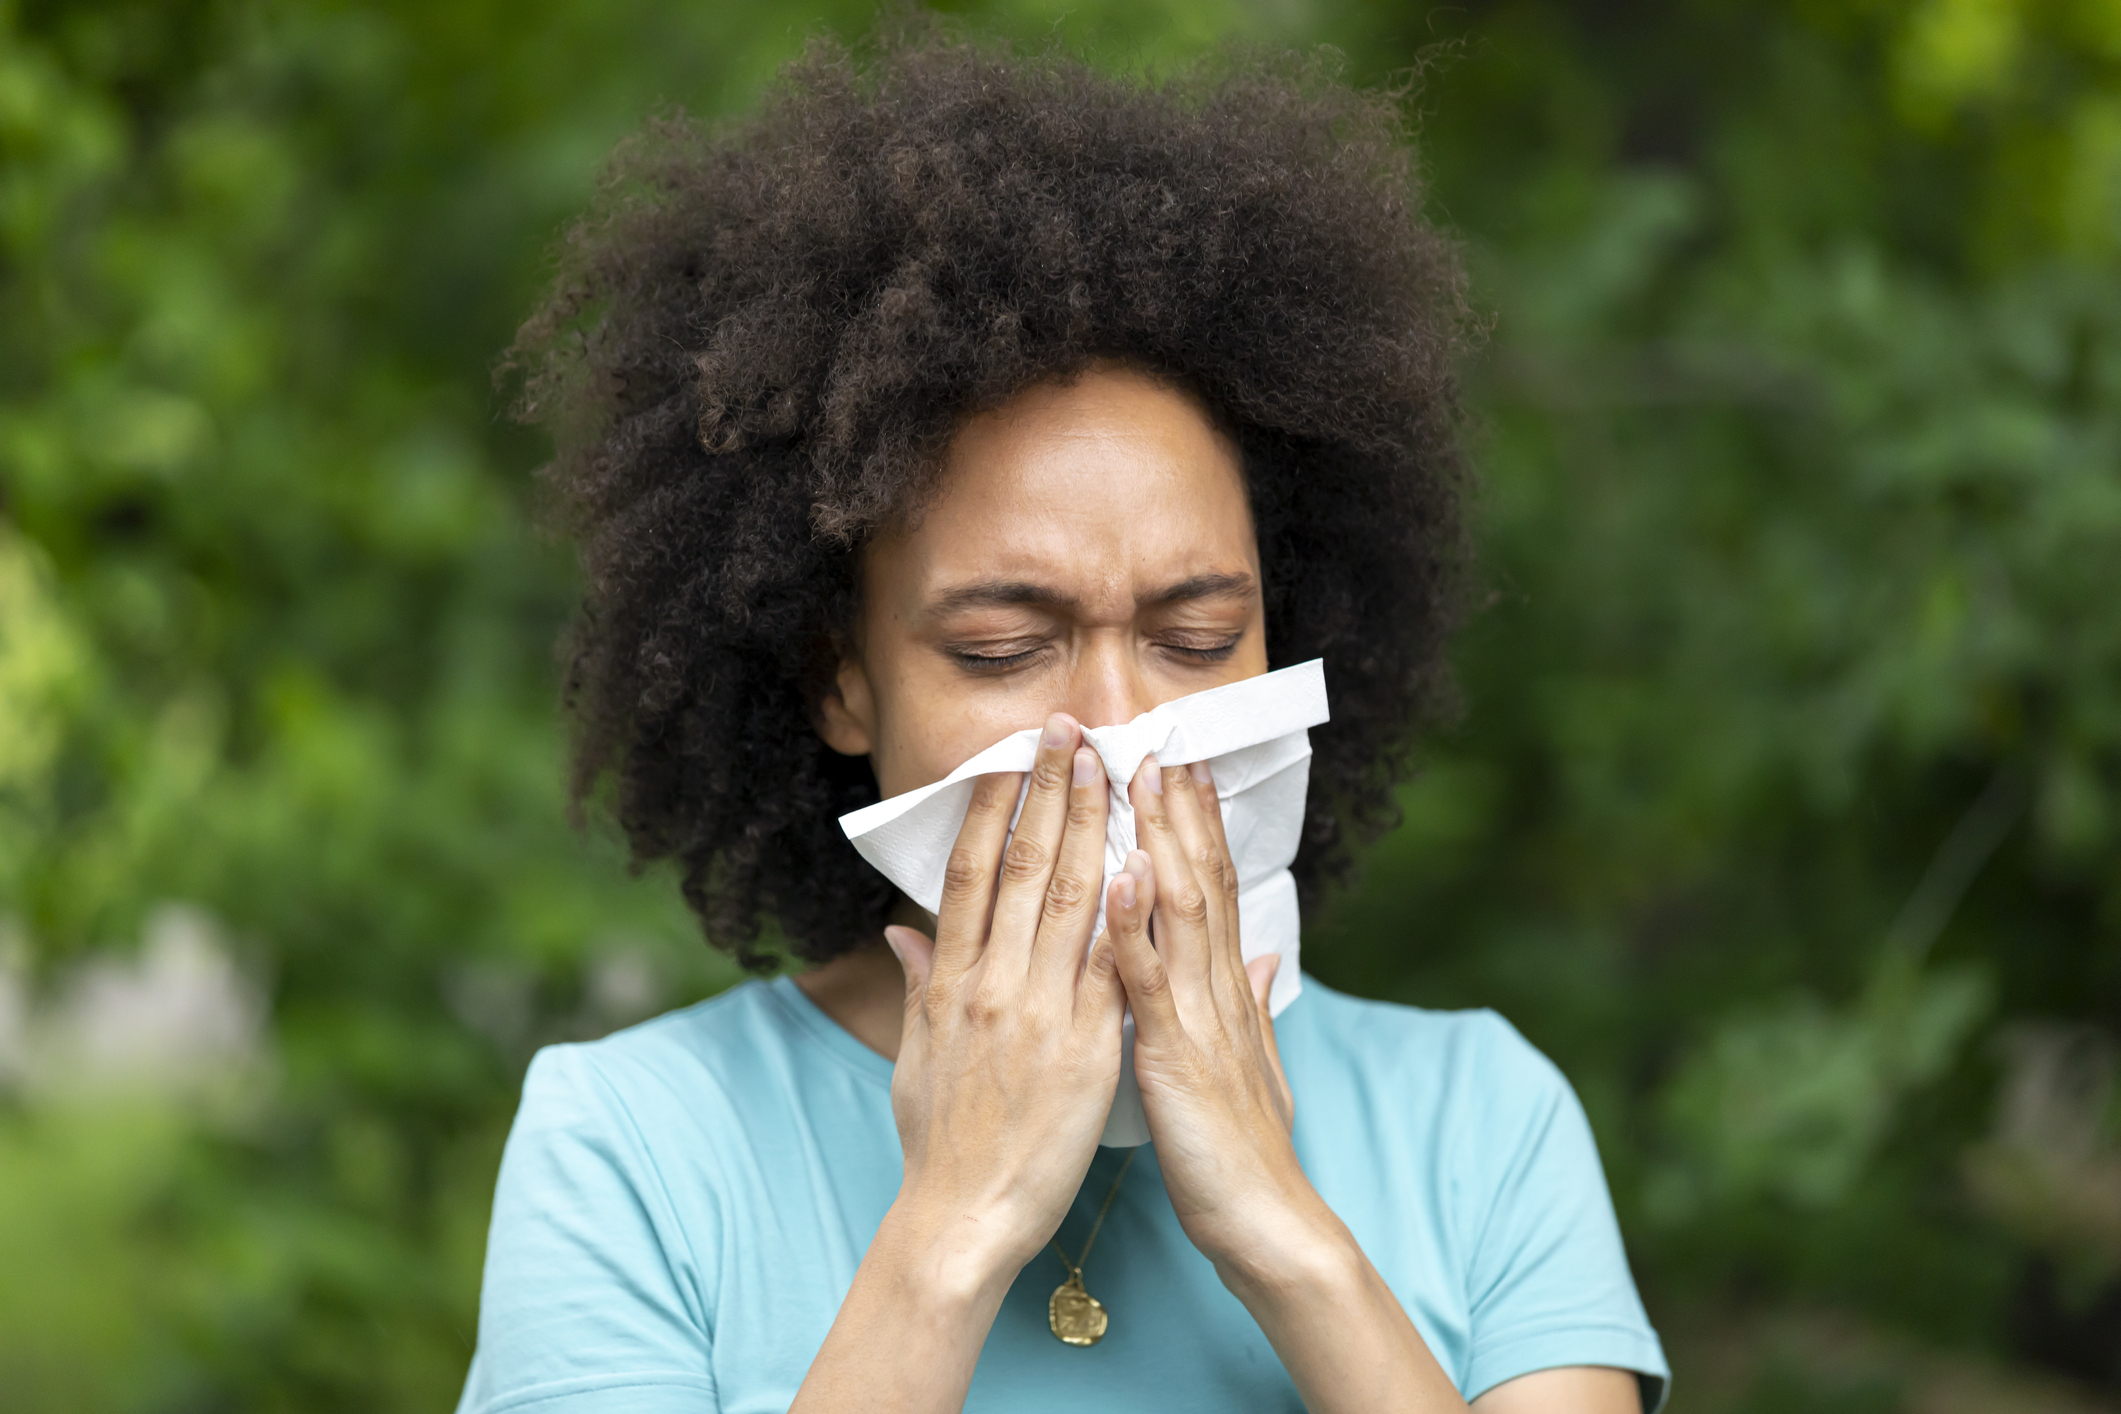 An African-American Woman with Sinusitis Problems is Feeling Displeased and Blowing Nose in Napkin During a Walk in City Park During a Summer Day.